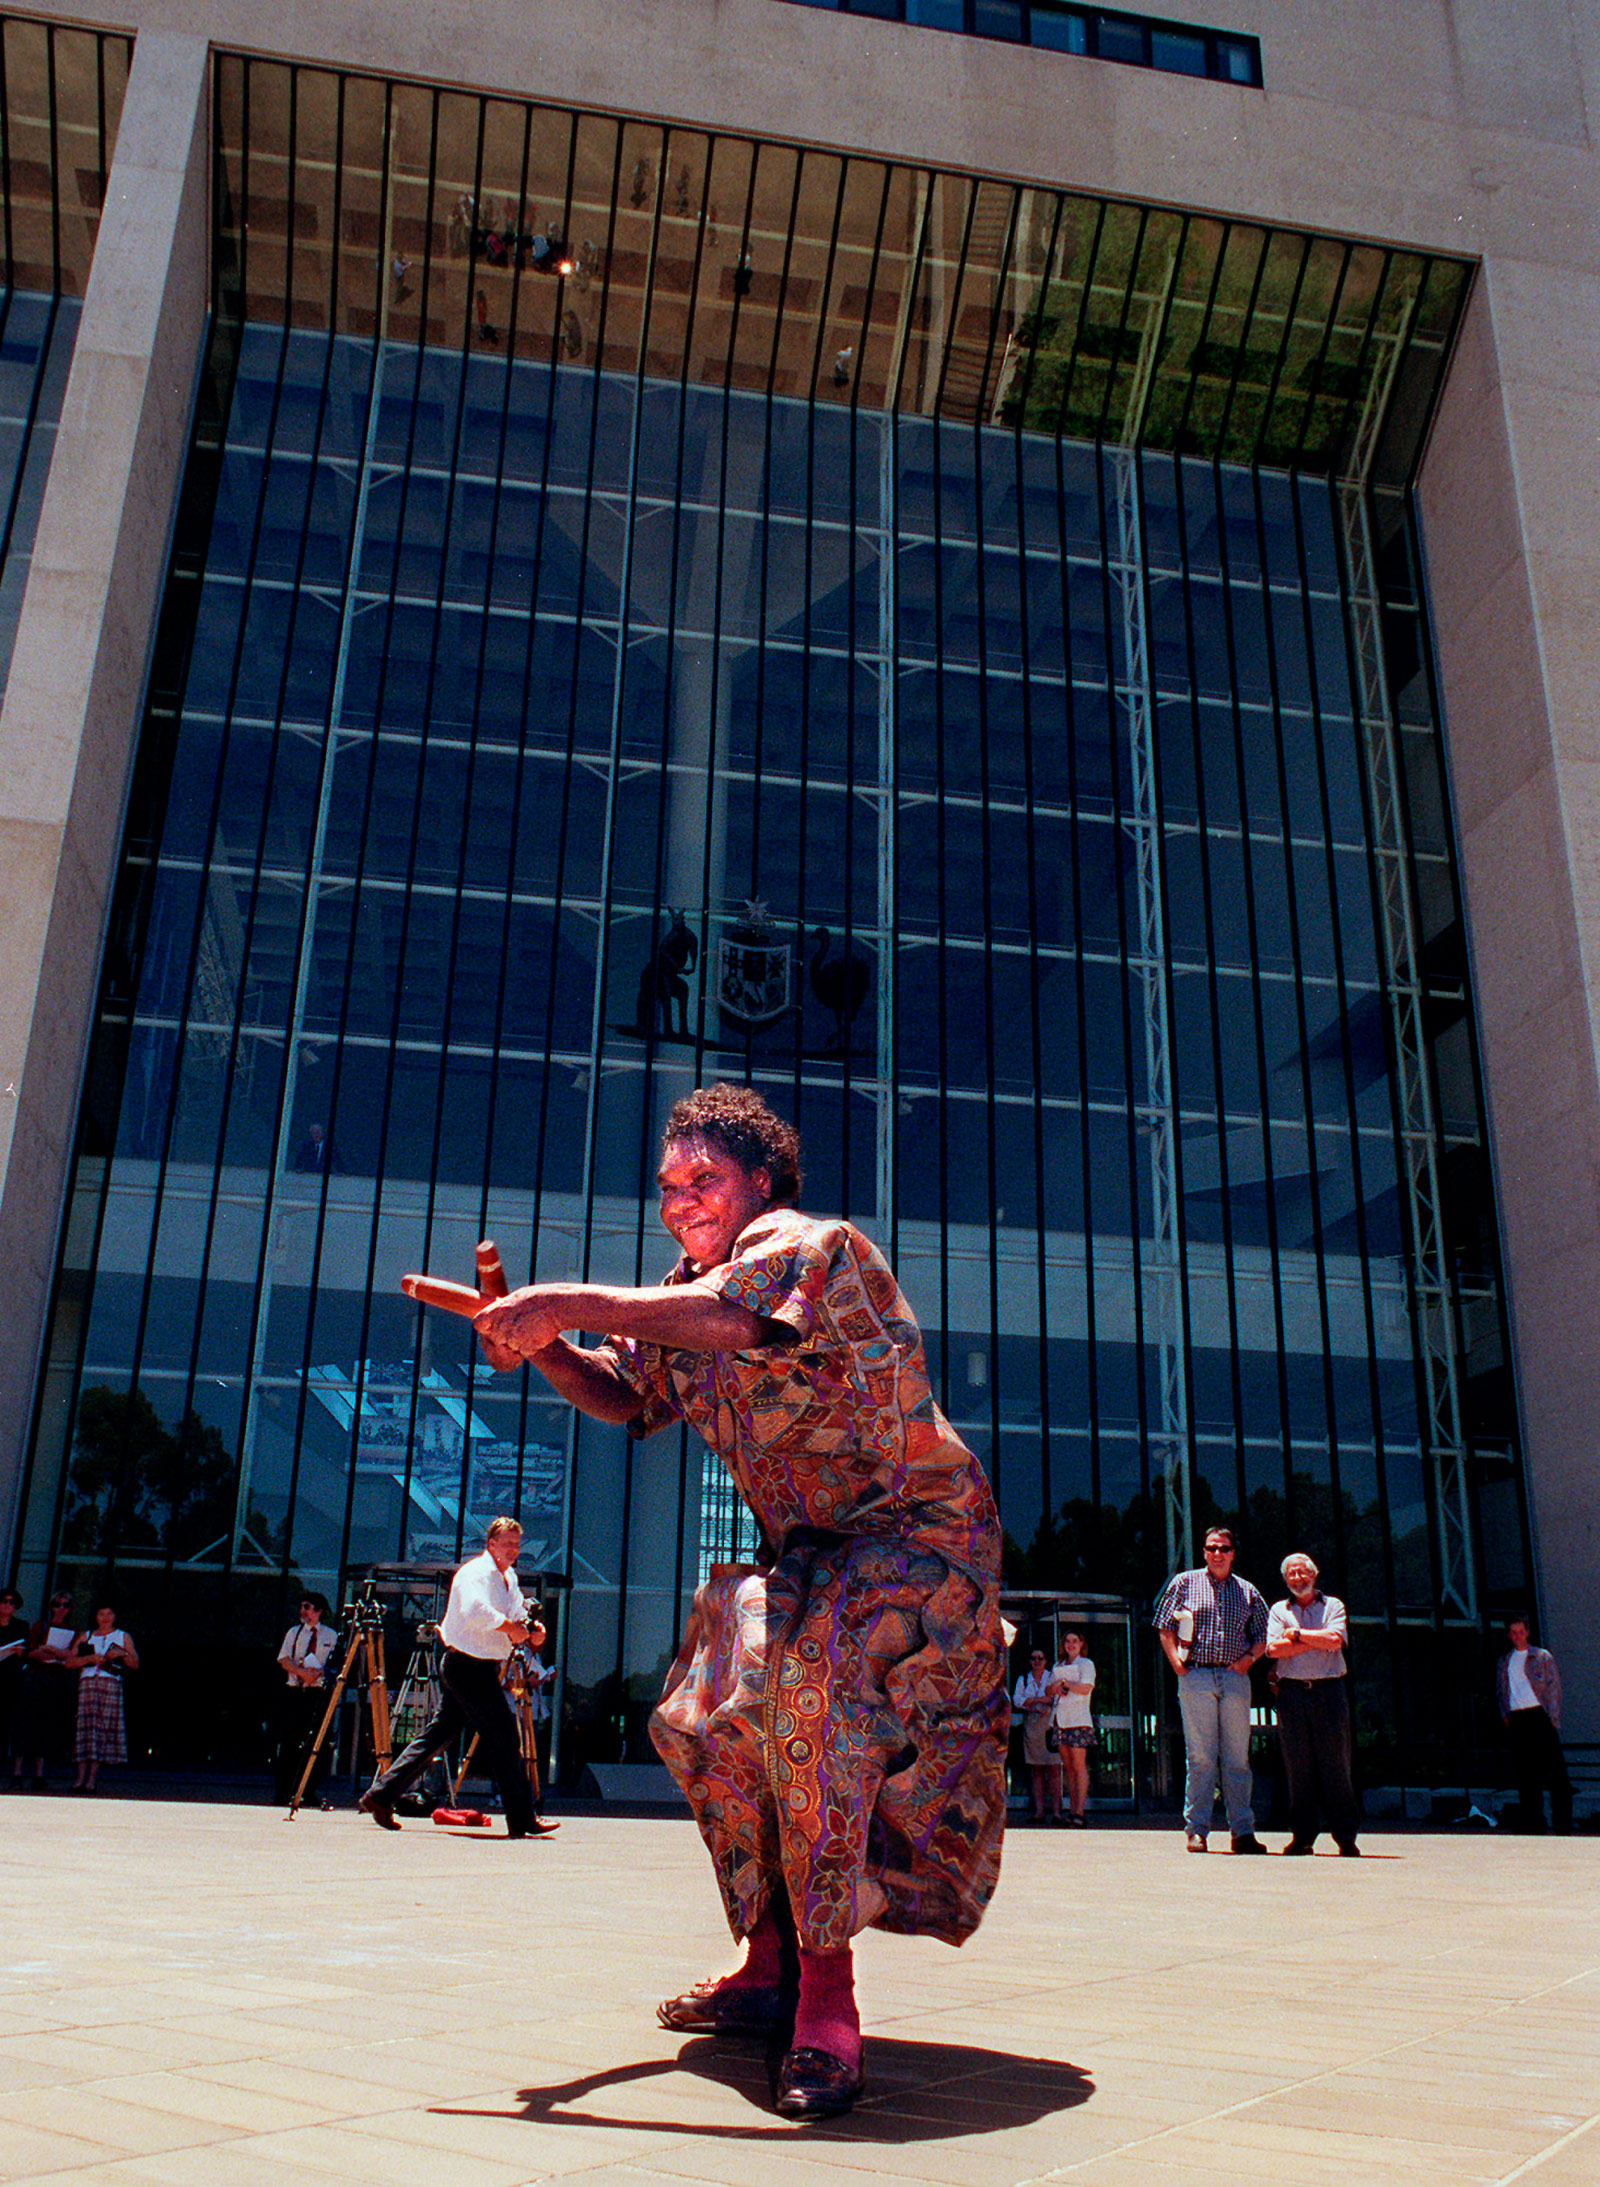 Aurukun Elder Gladys Tybingoompa dances on the steps of the High Court, which had just ruled in favour of the Wik native title claim, 1996